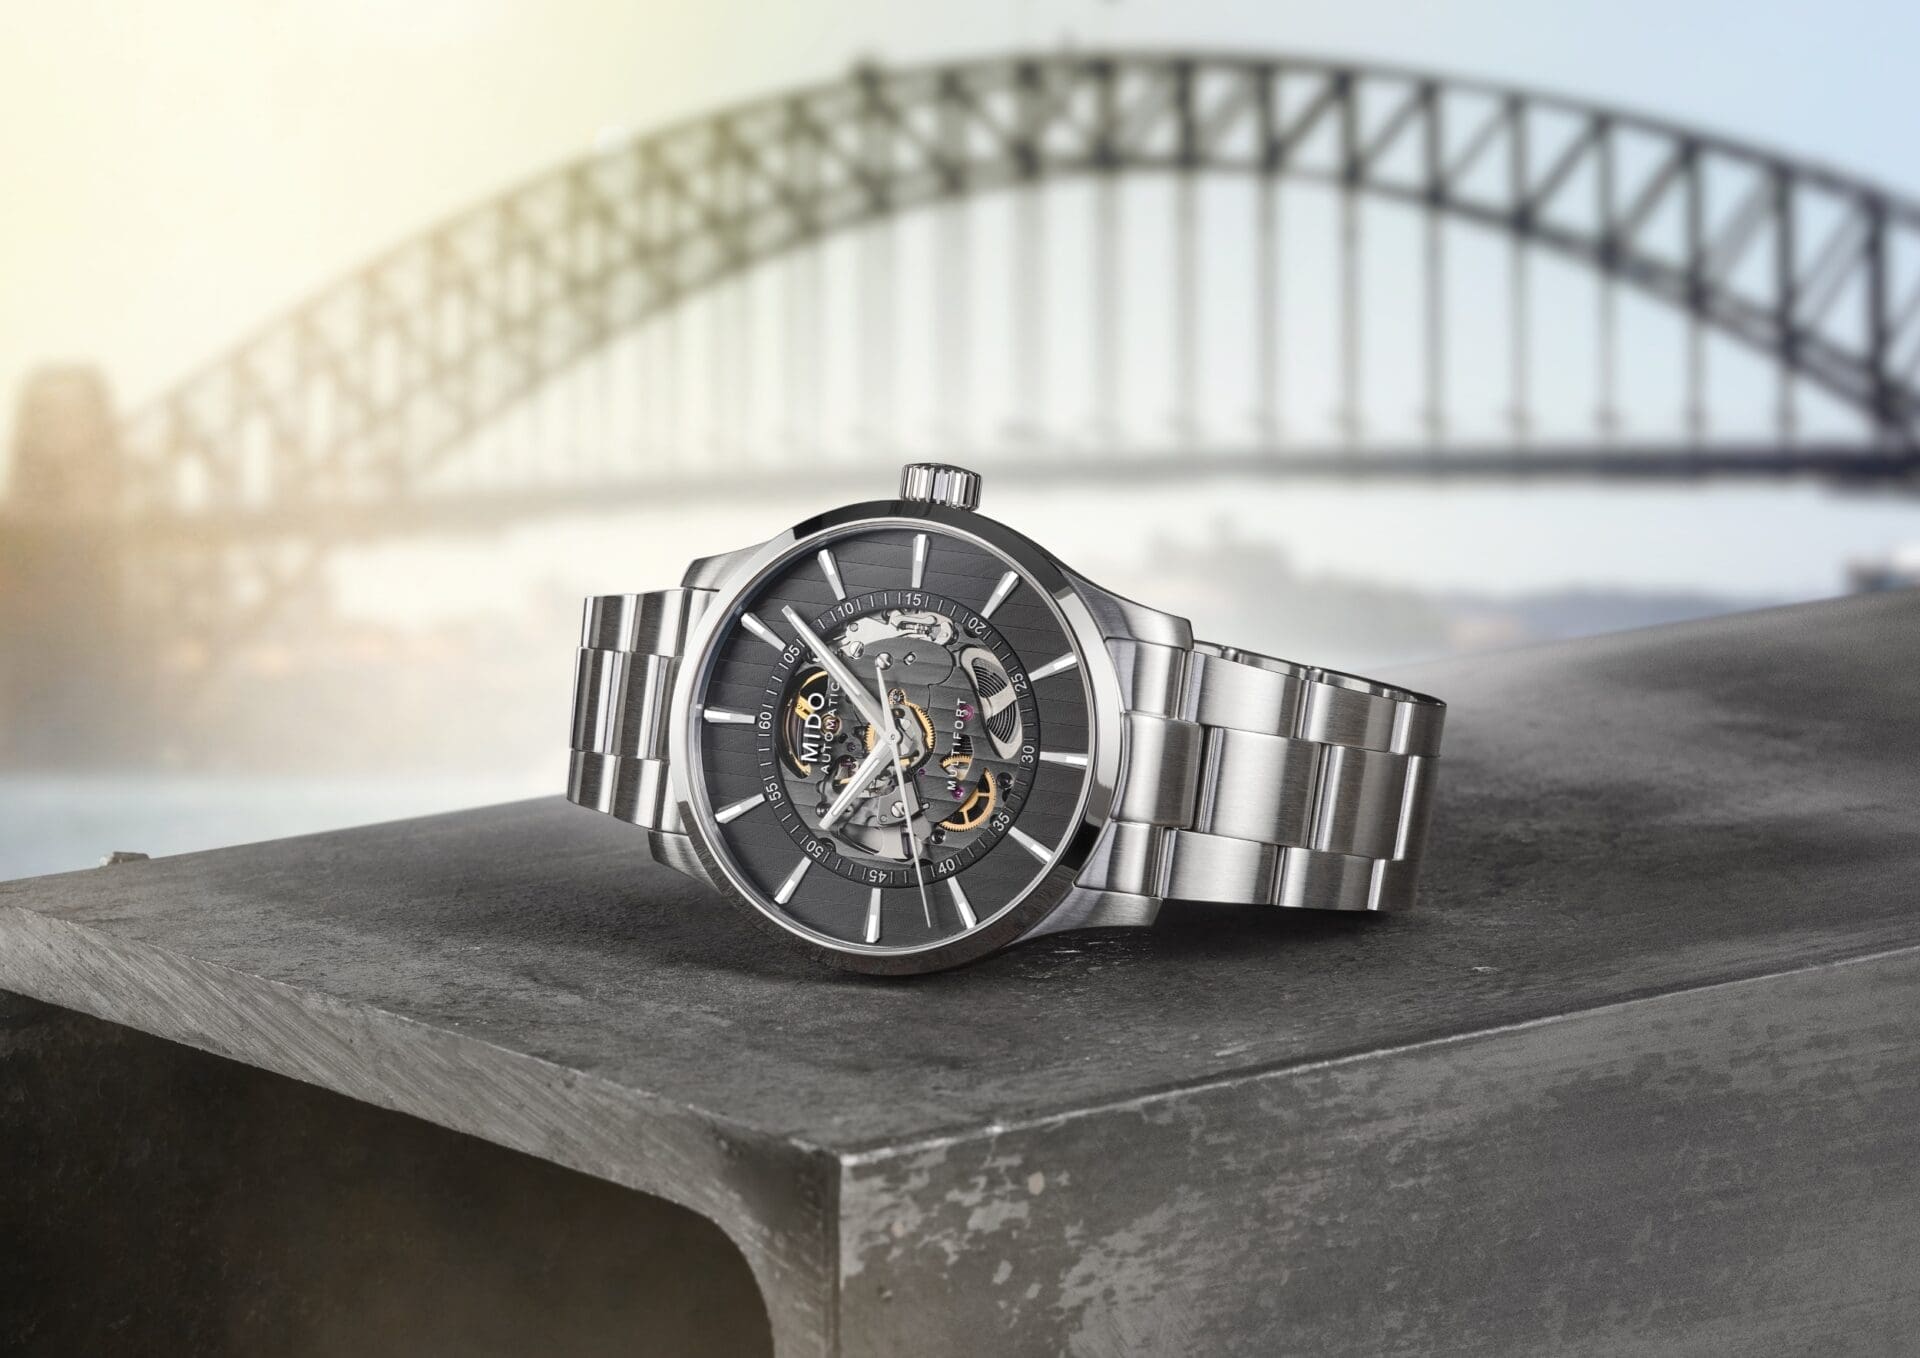 INTRODUCING: The Mido Multifort Skeleton Vertigo is a strong value play inspired by a true Aussie icon